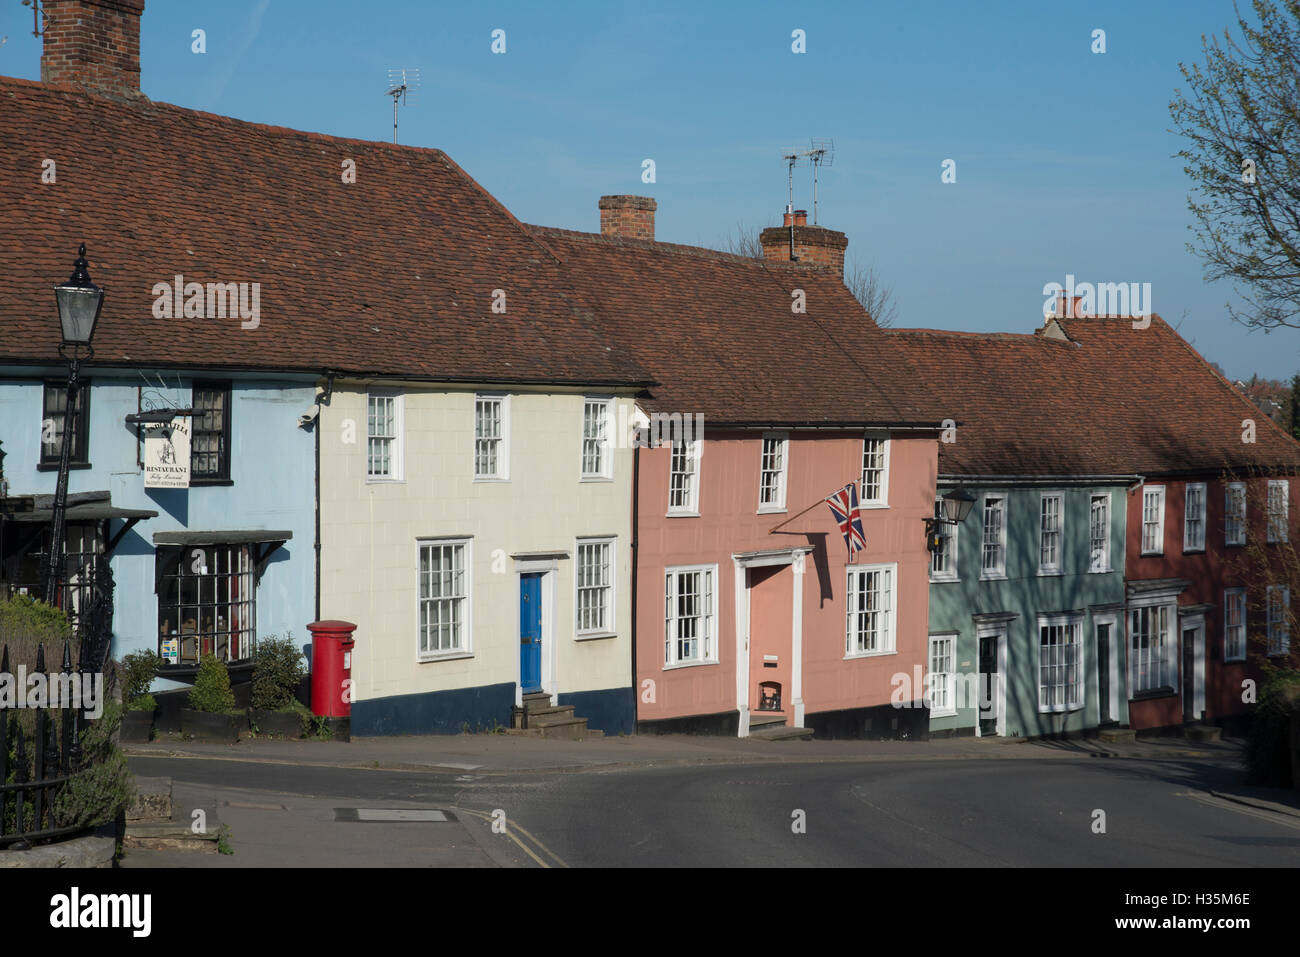 A row of houses in an Essex town Stock Photo